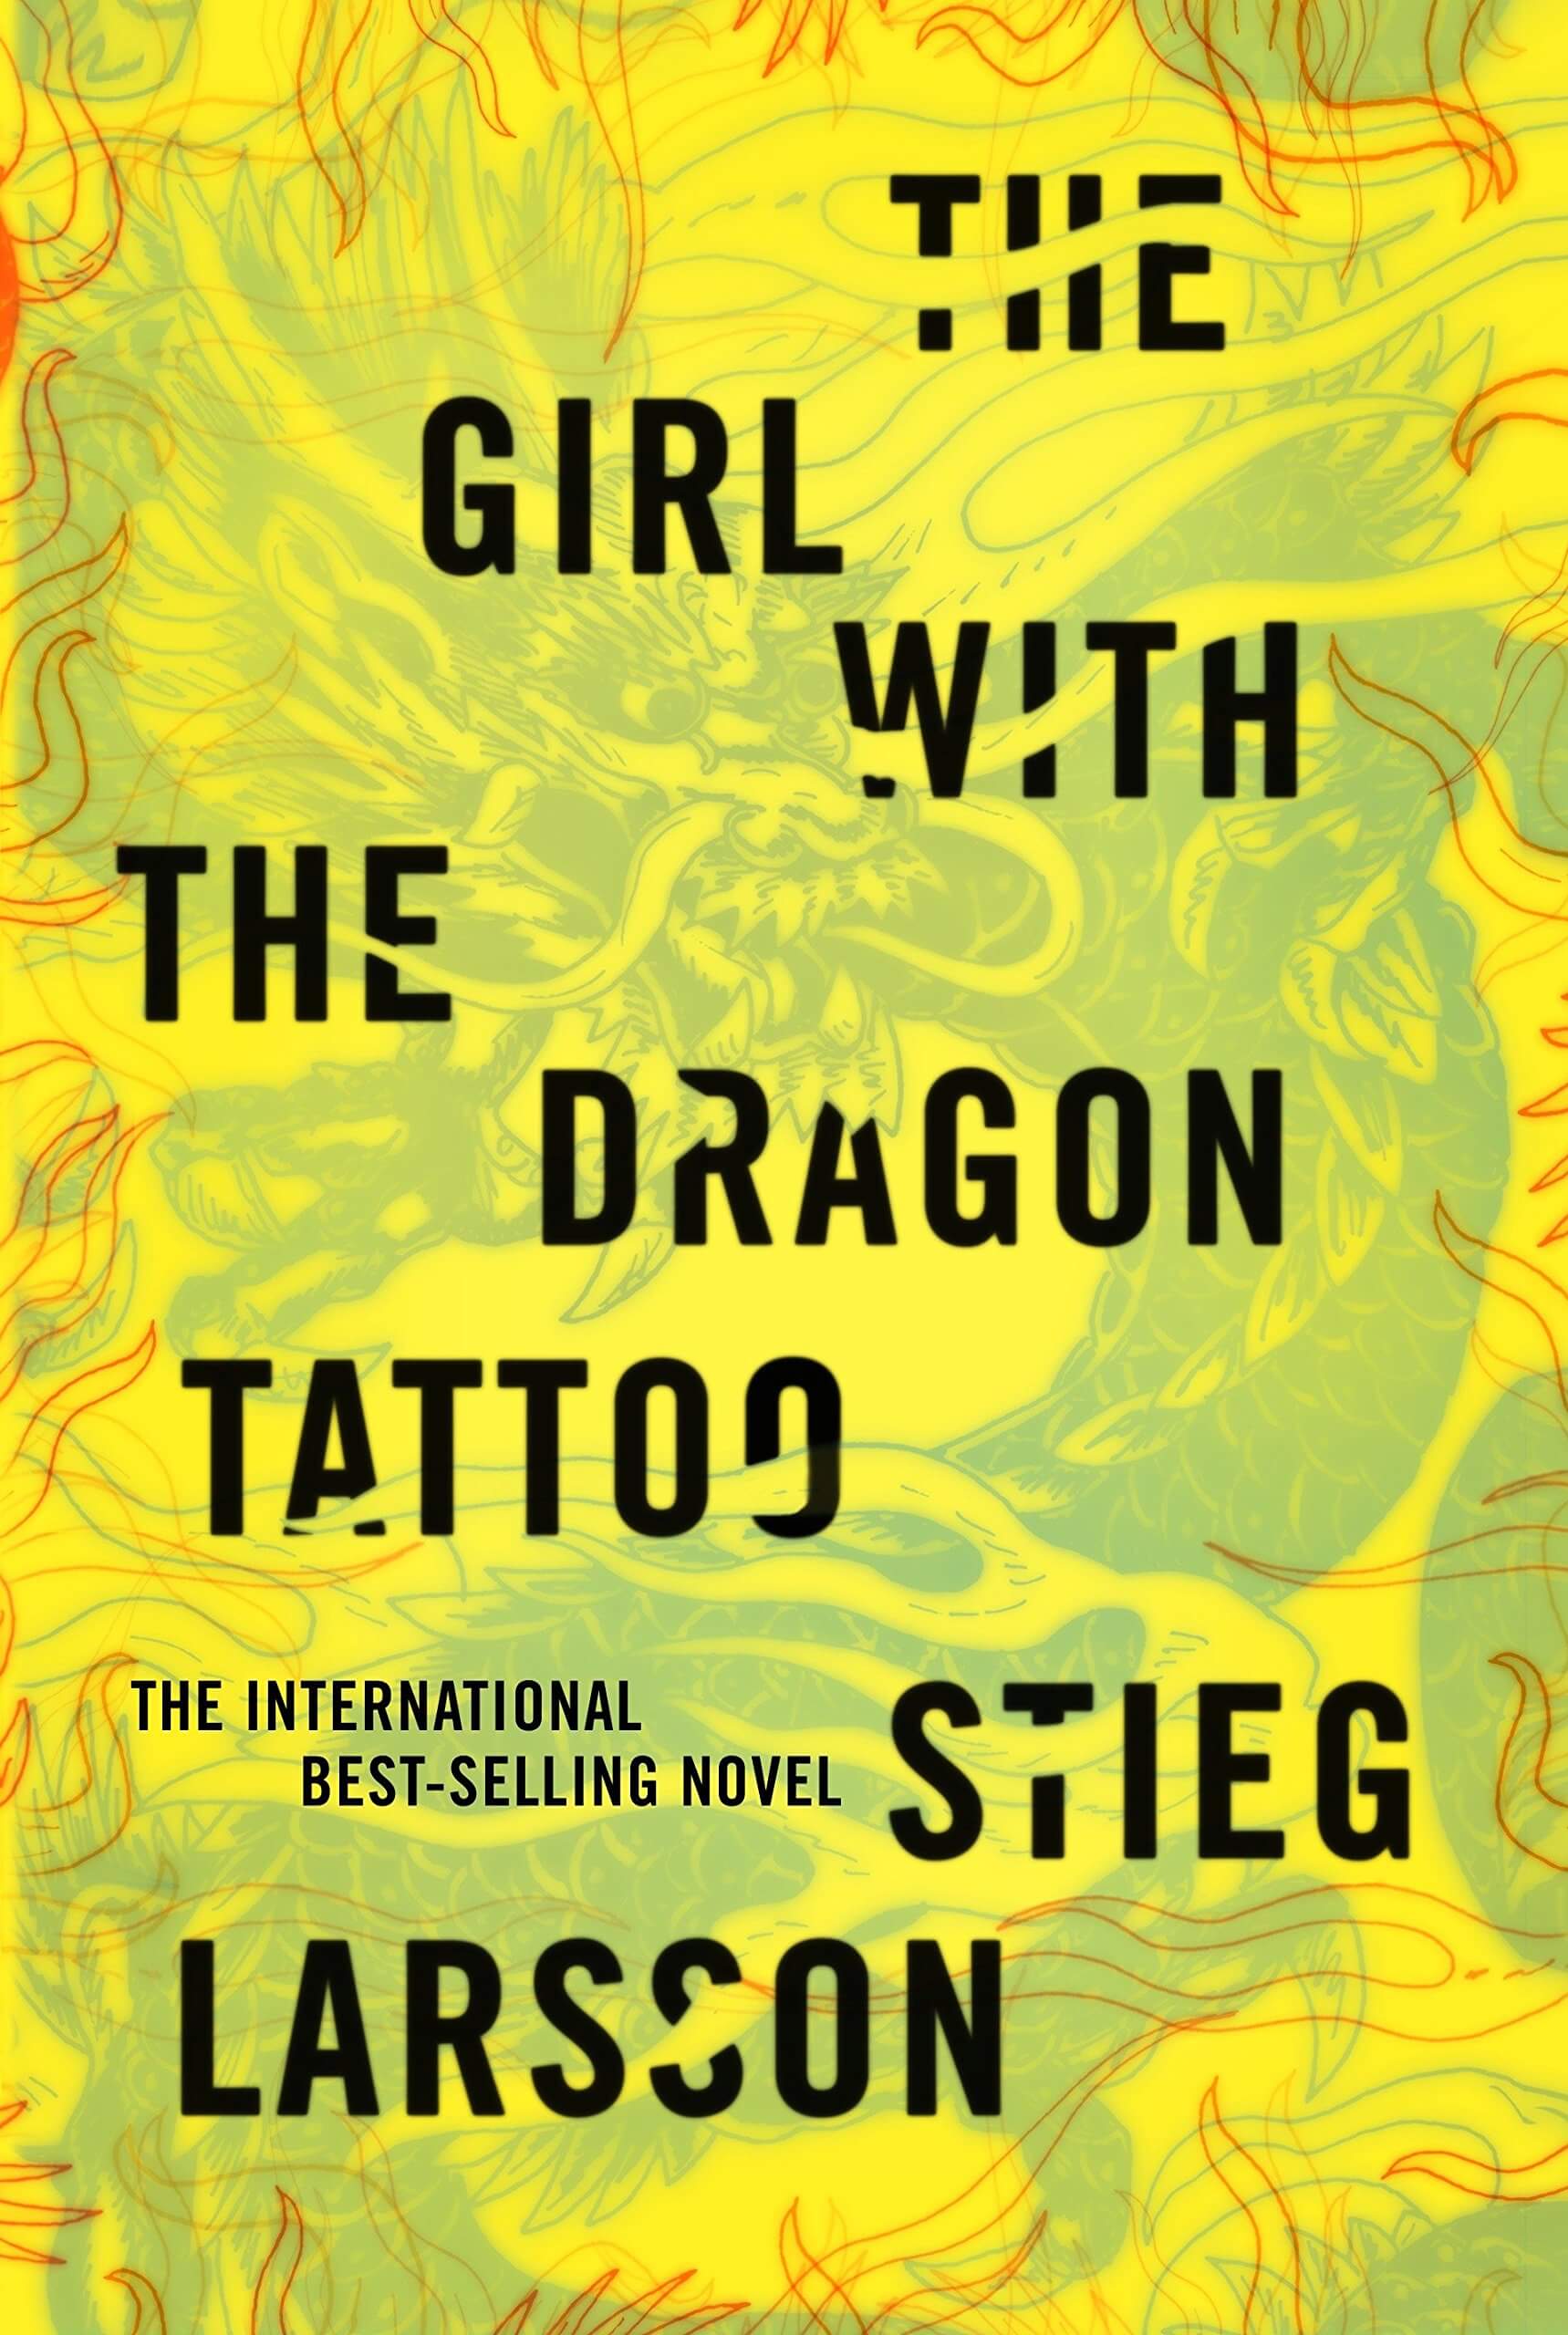 Cover of The Girl With the Dragon Tattoo by Stieg Larsson